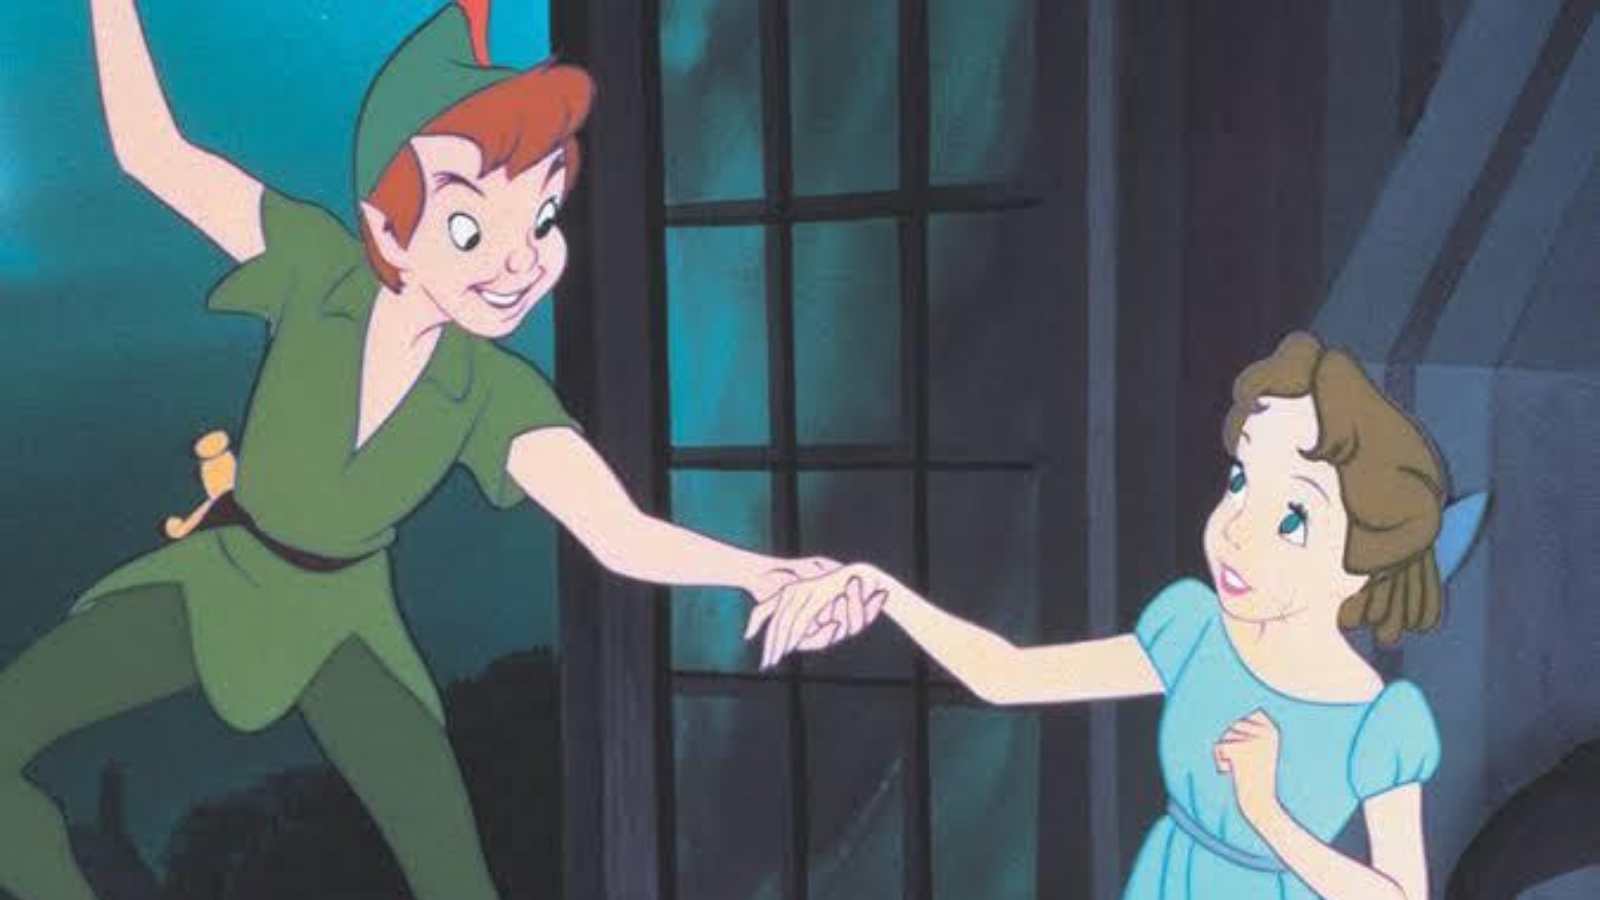 Peter Pan live action remake is coming out this year, 2022. 